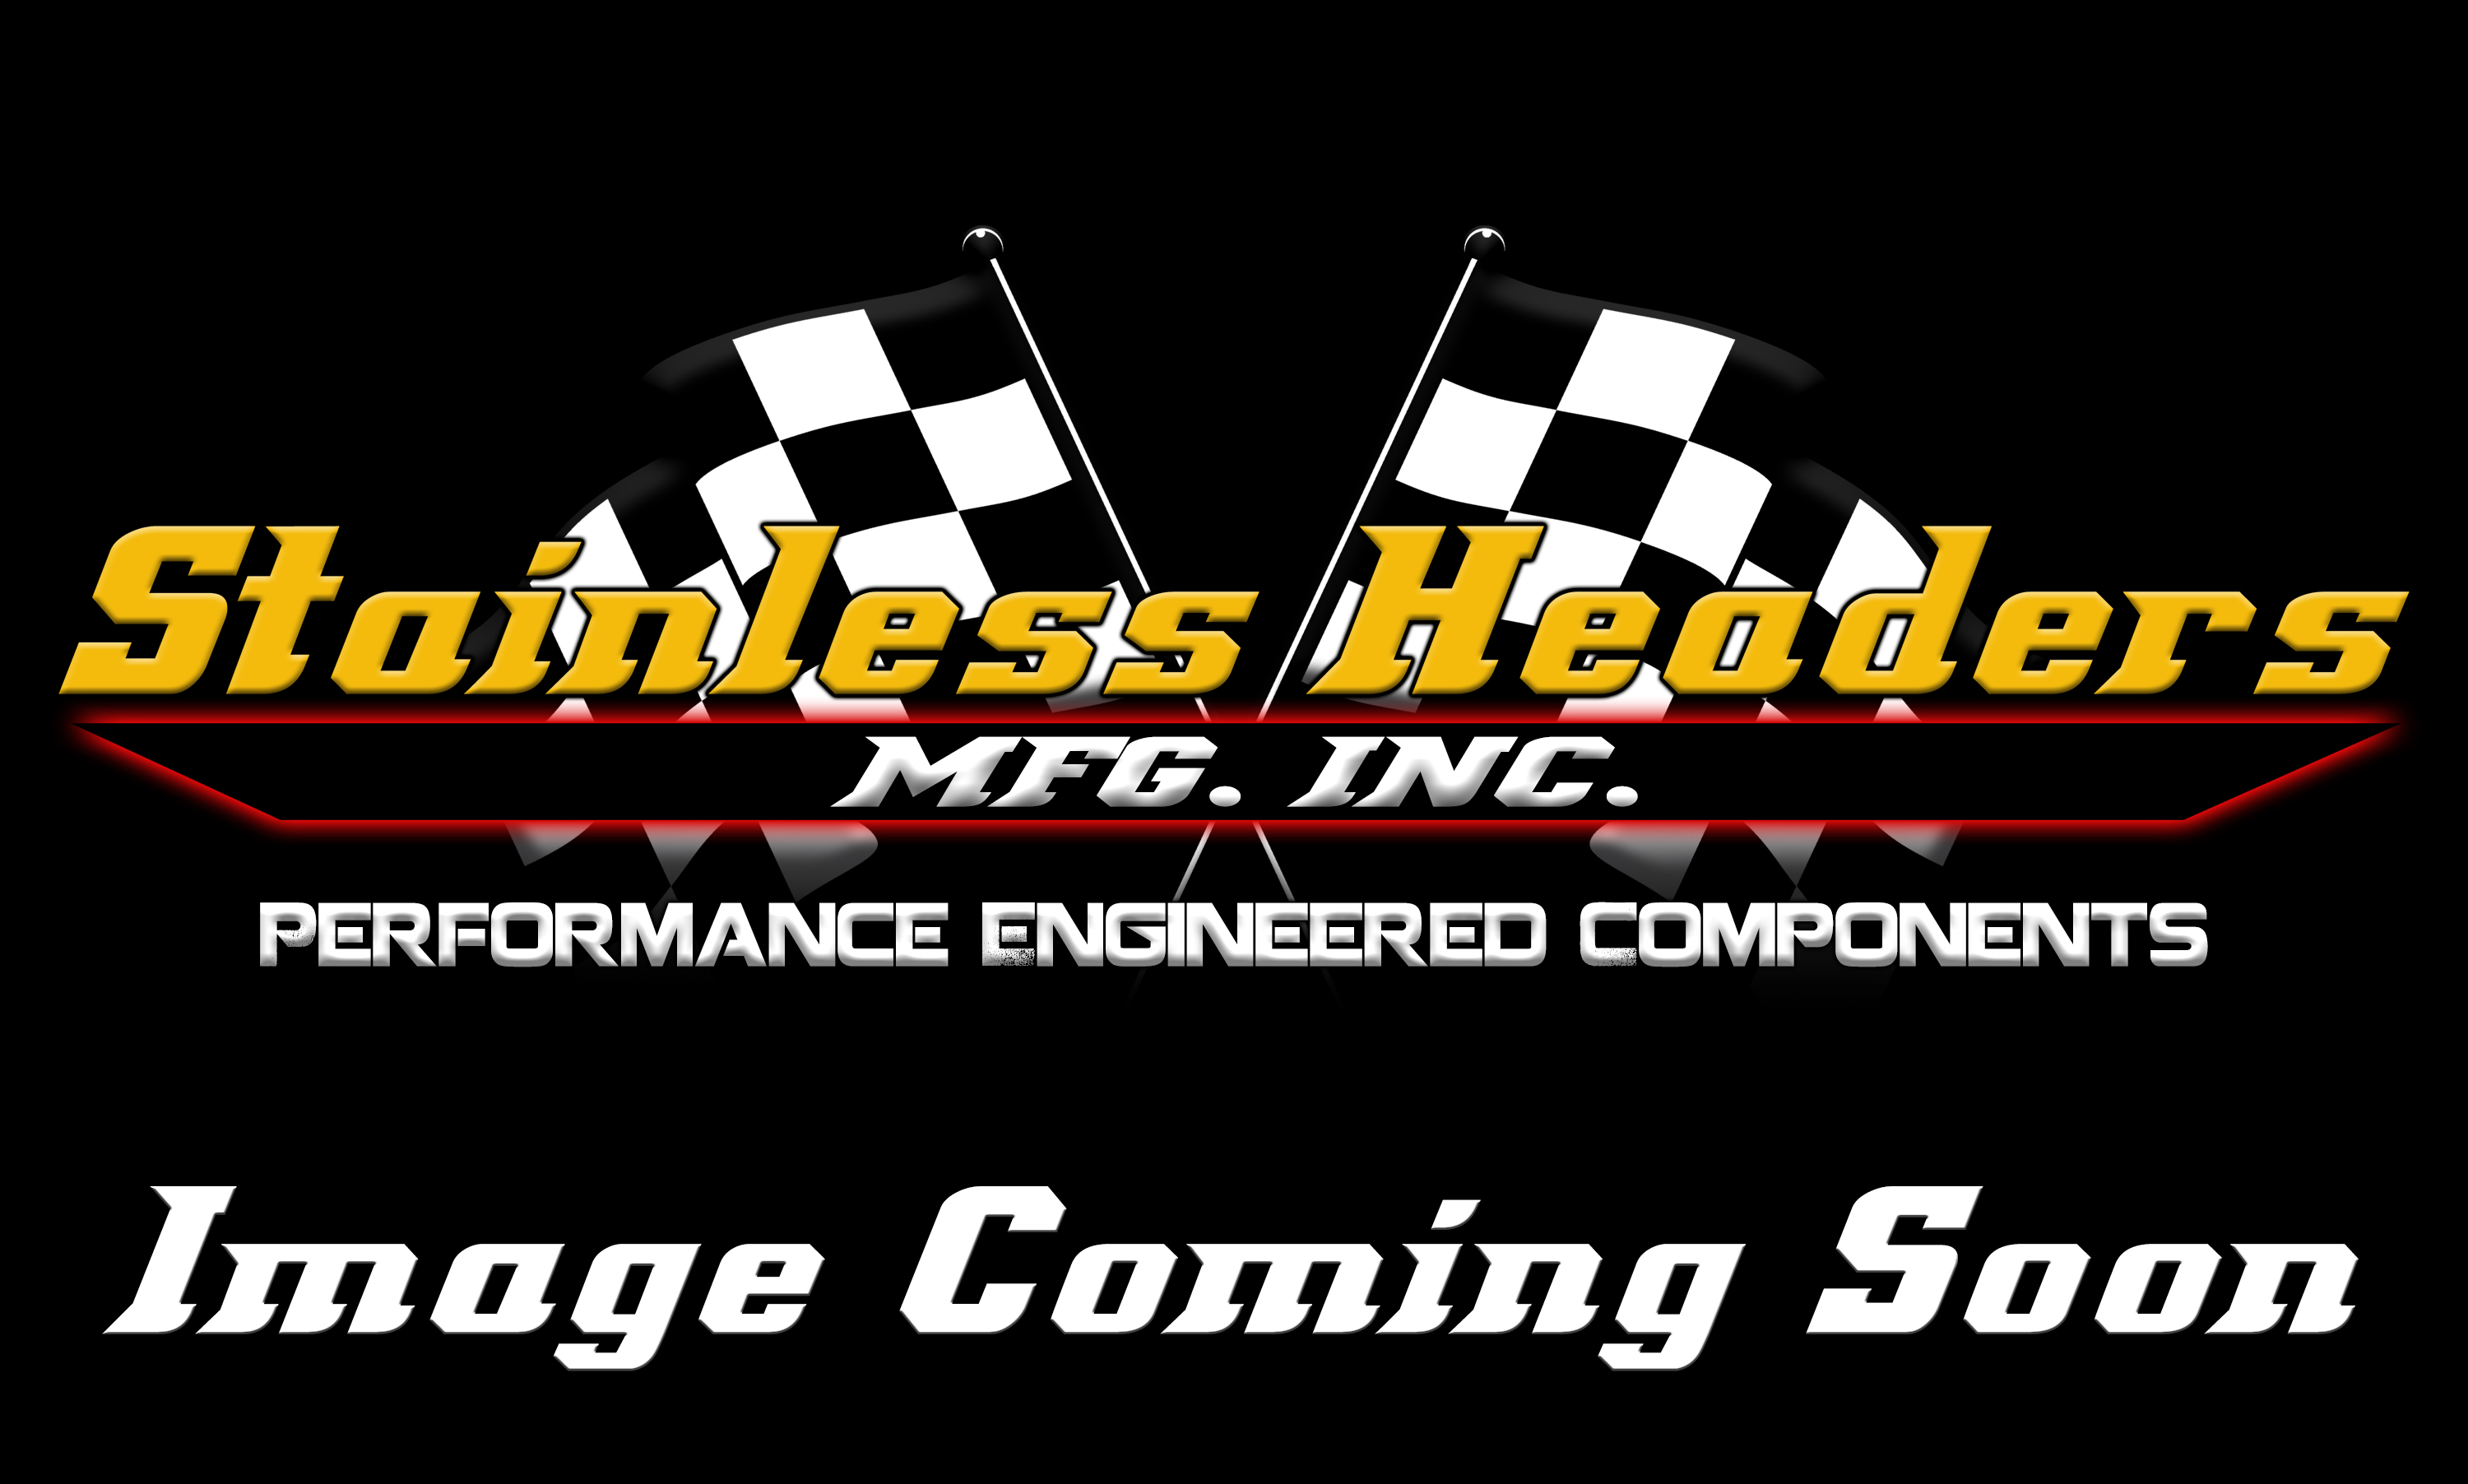 CompTurbo Technologies - CTR4204R-7490 Mid Frame Oil-Less 3.0 Turbocharger (1300 HP) - Image 1